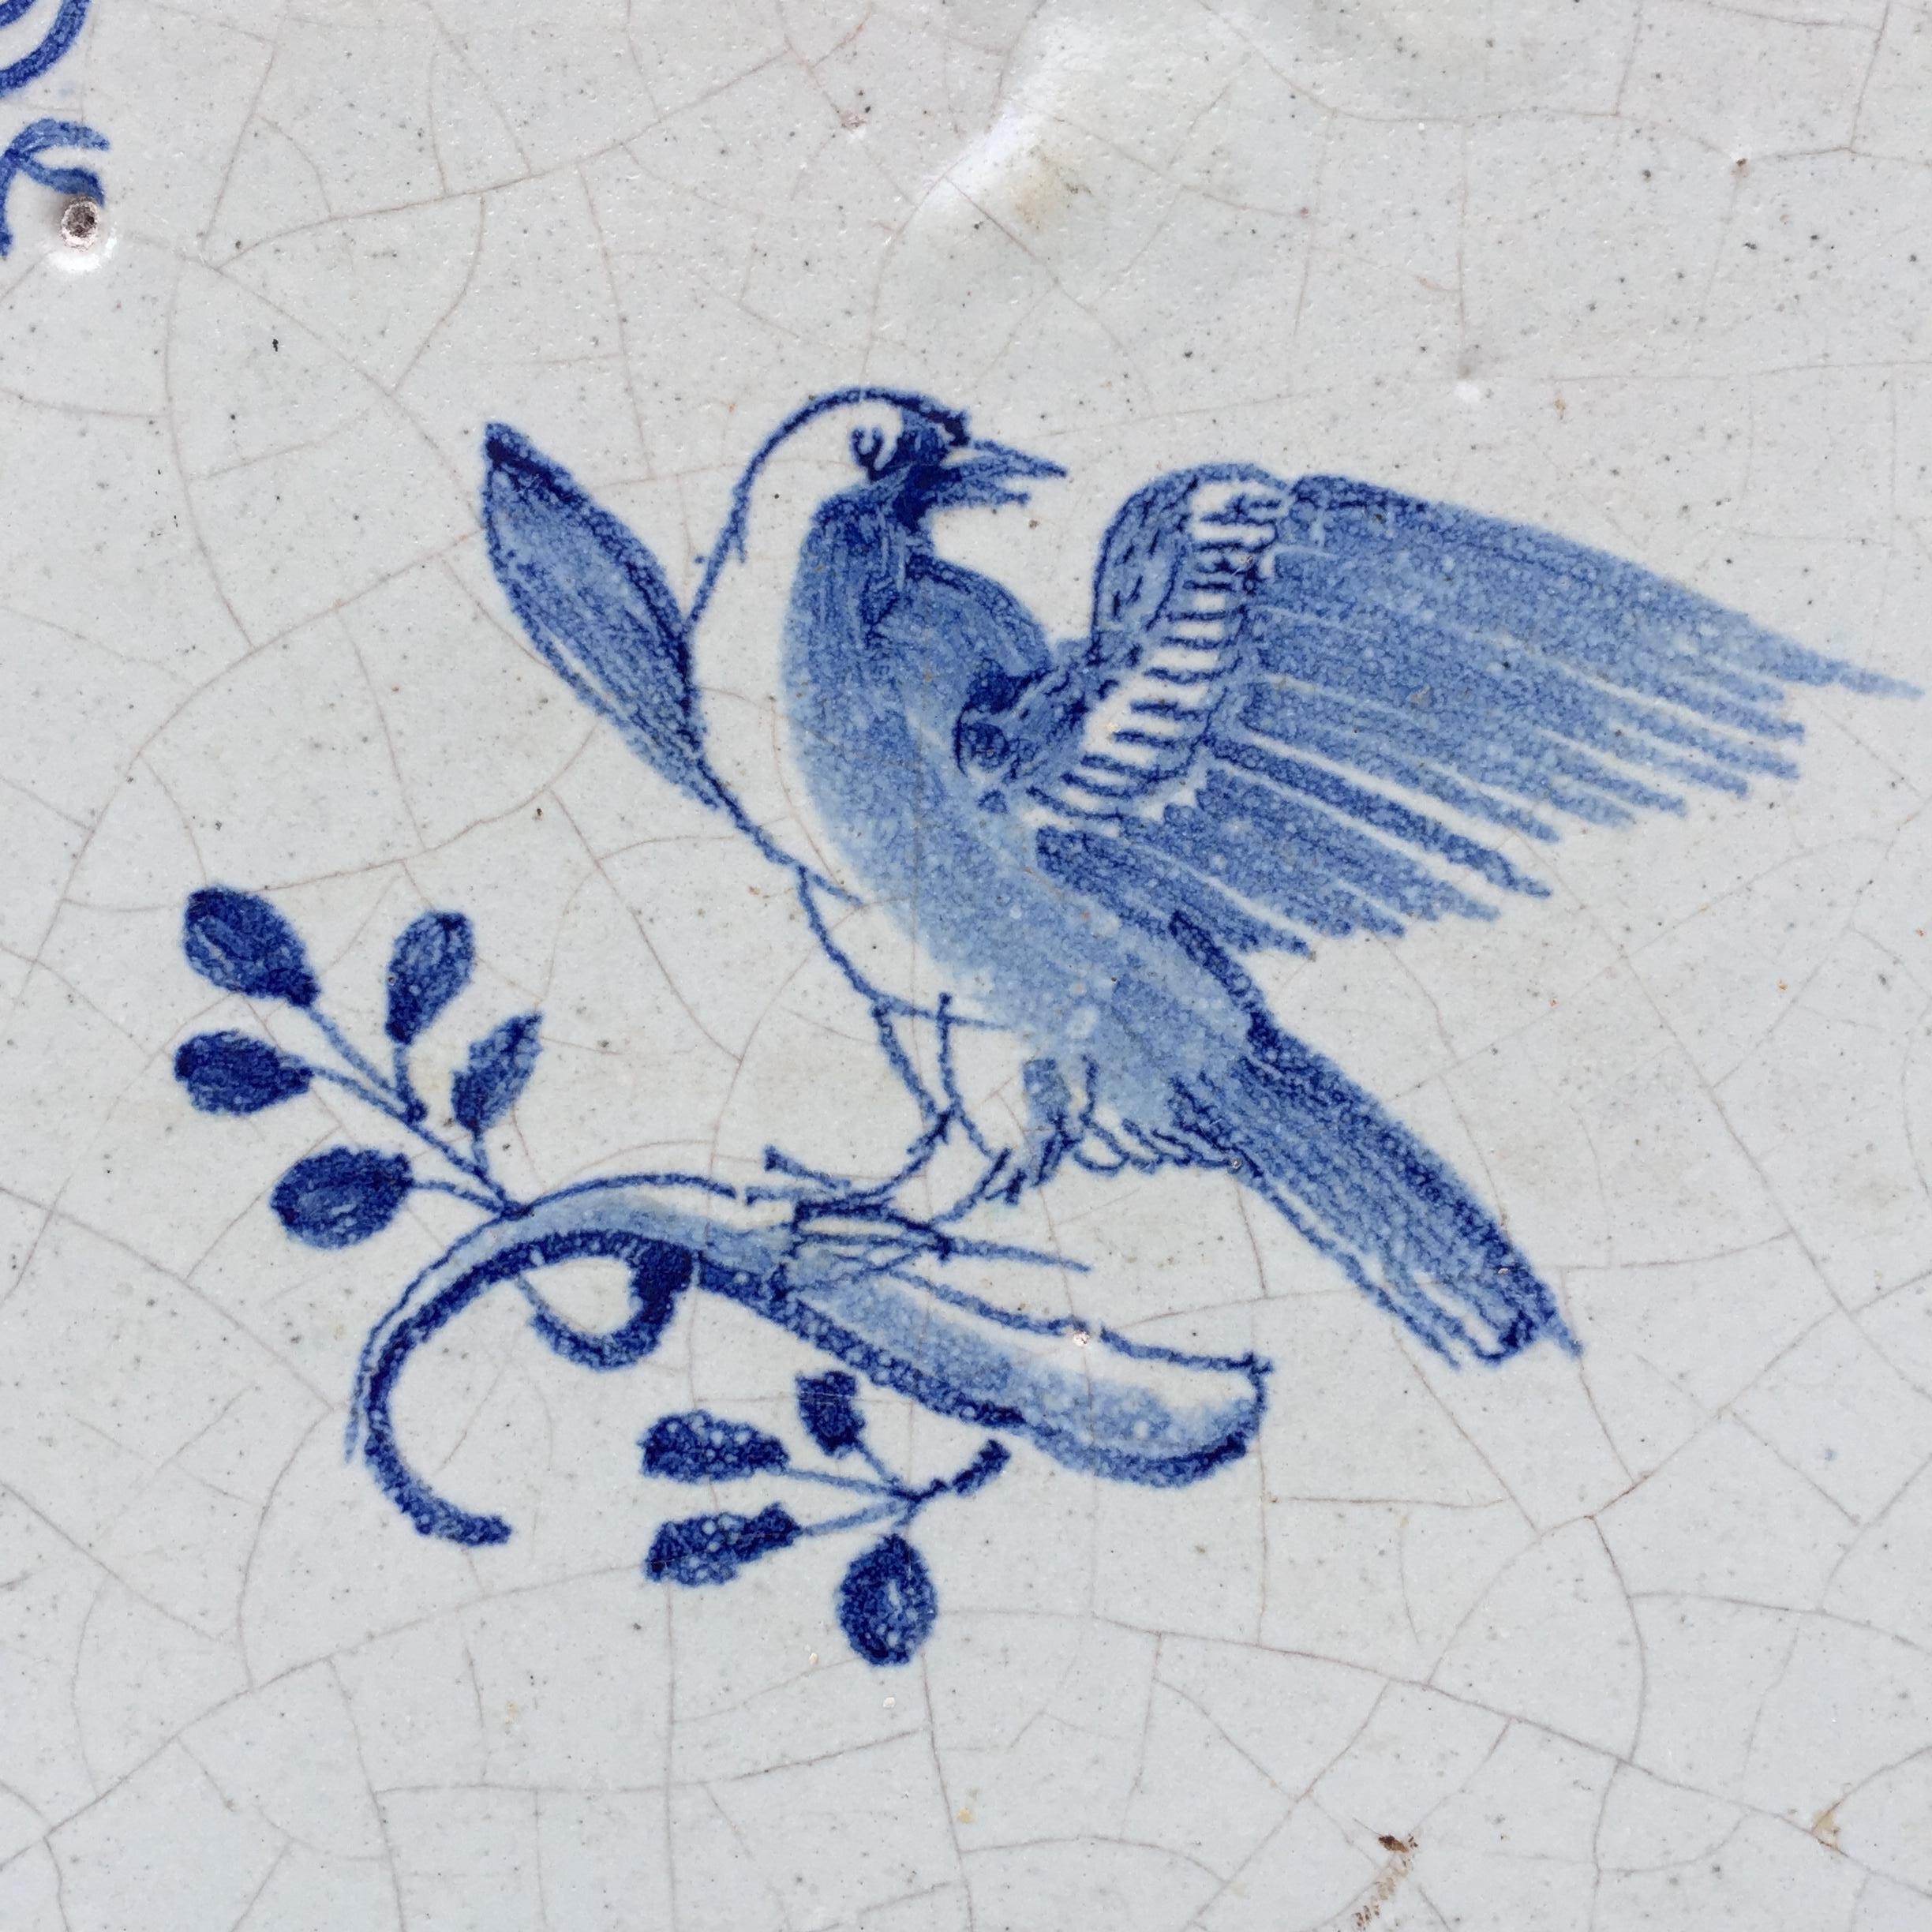 Baroque Blue and White Dutch Delft Tile with Bird, Mid 17th Century